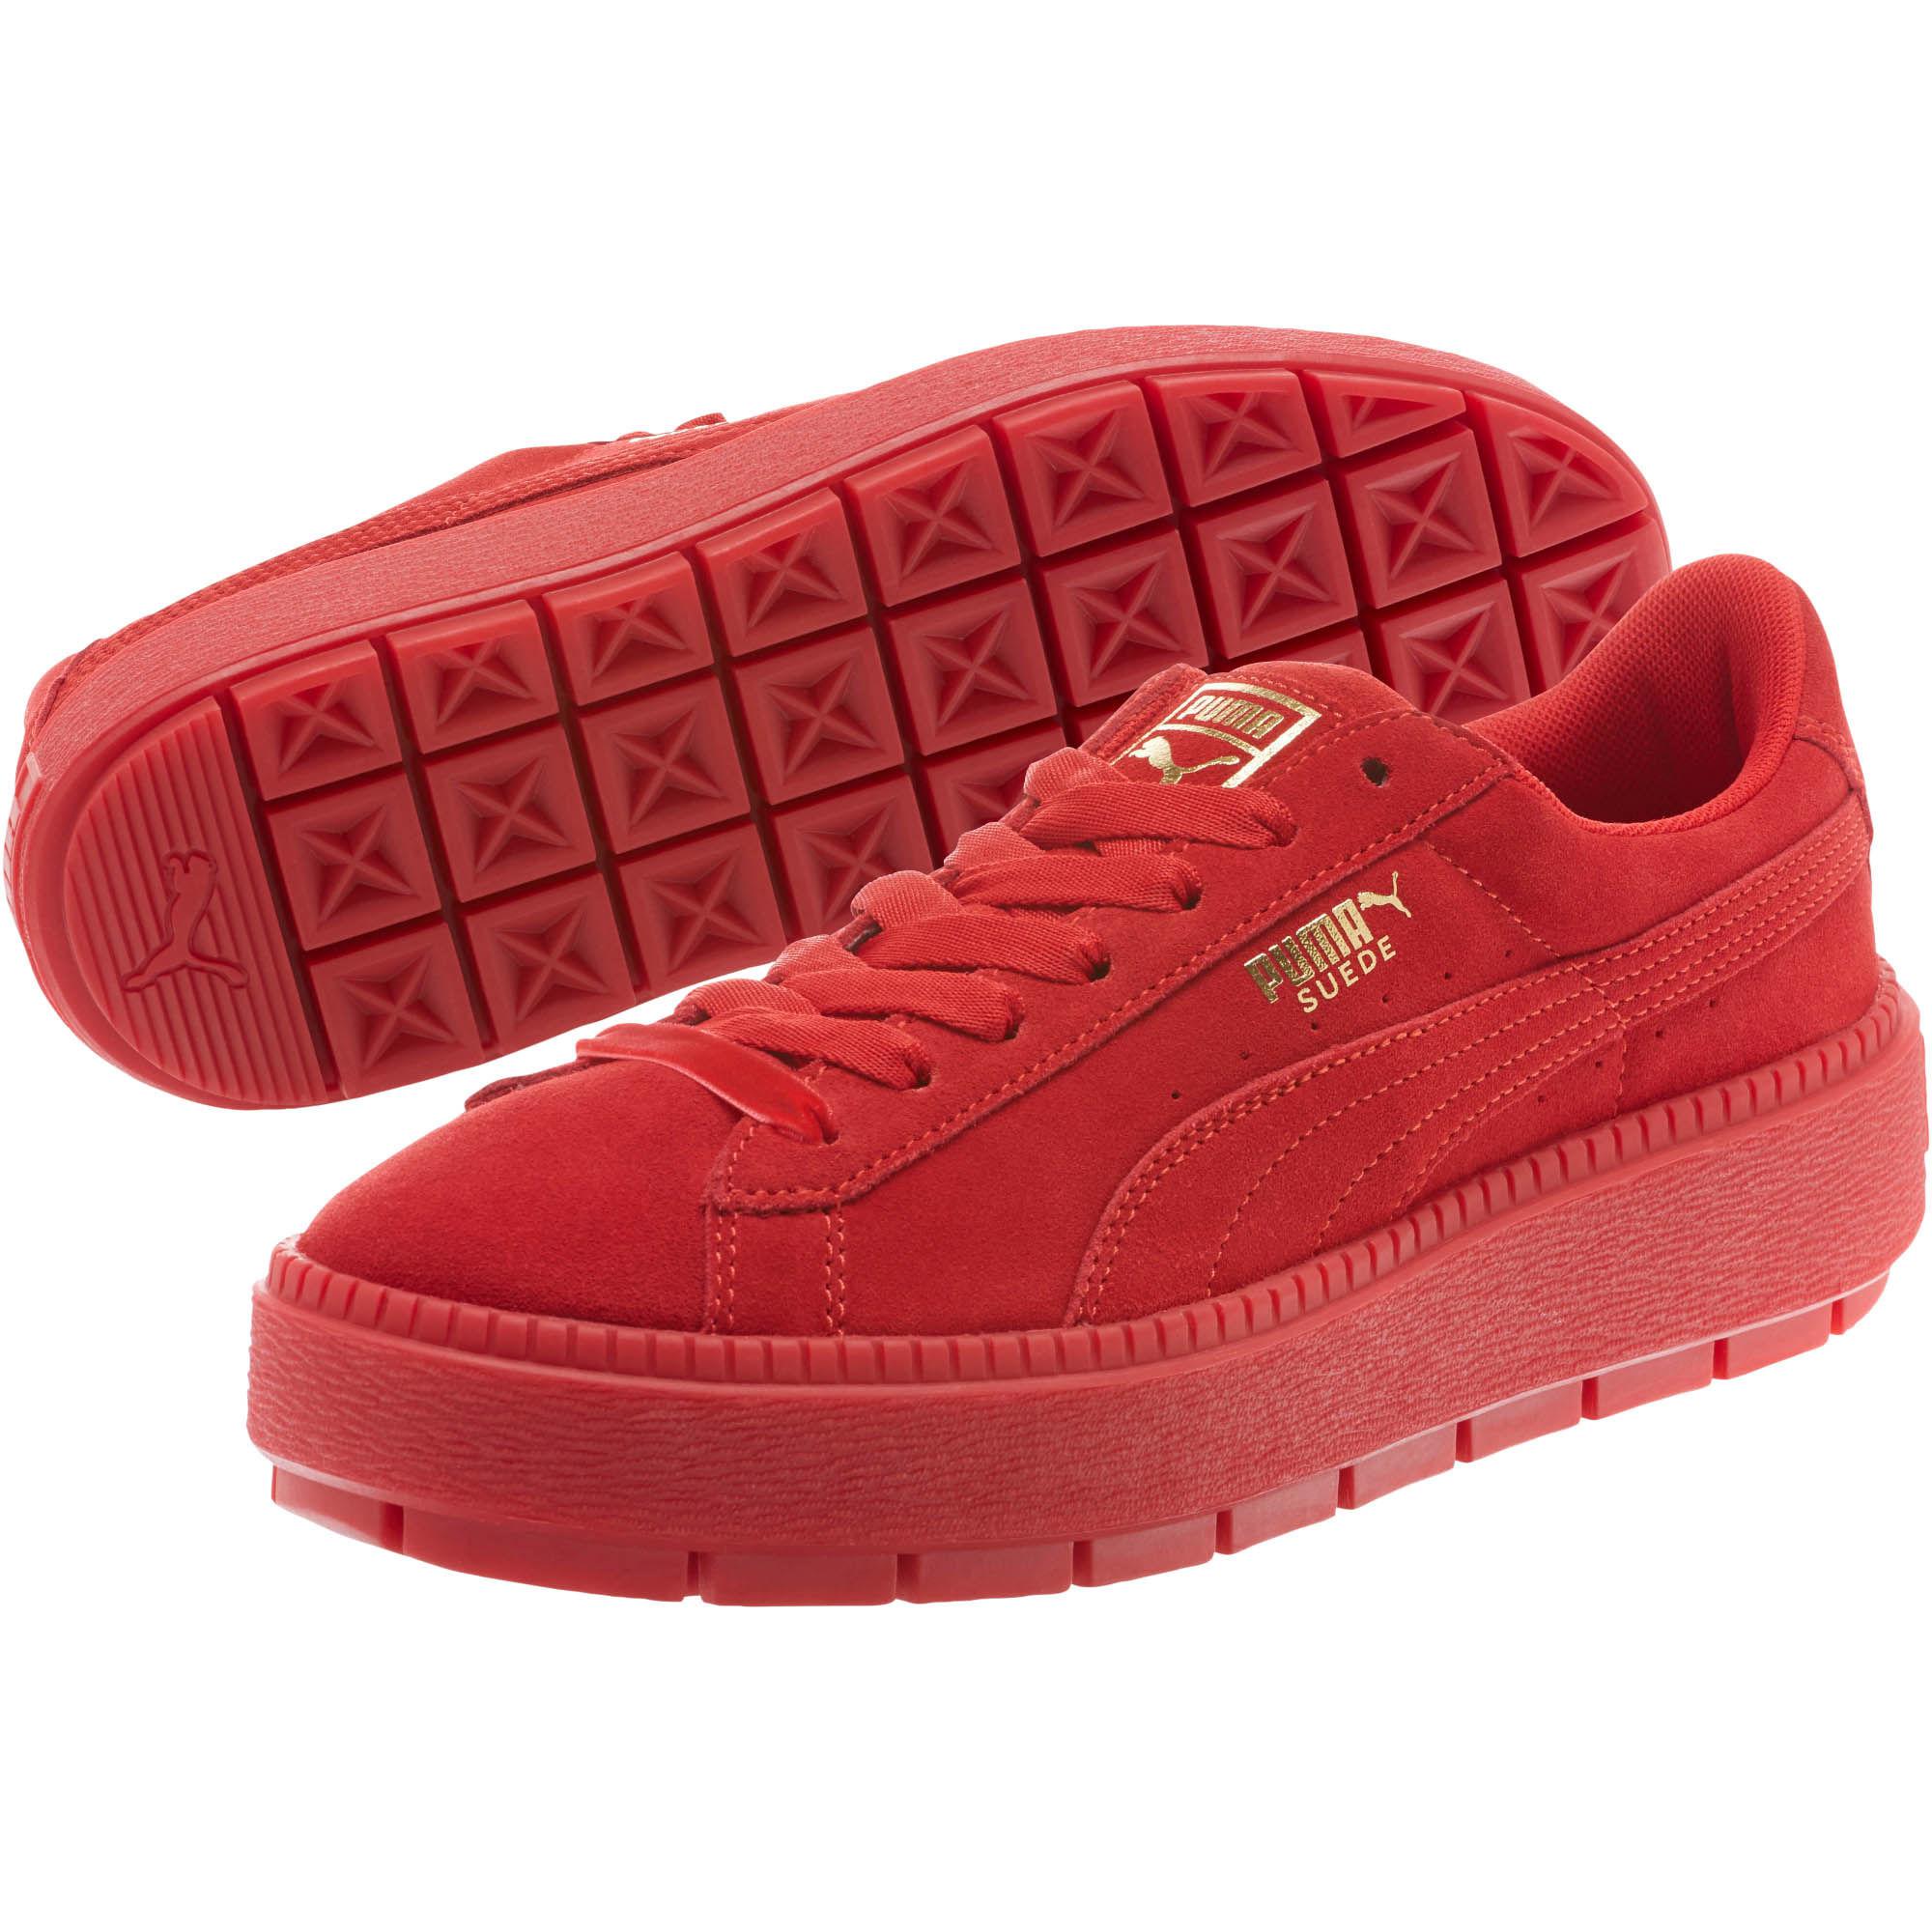 PUMA Suede Platform Trace Valentine's Day Women's Sneakers in Red - Lyst